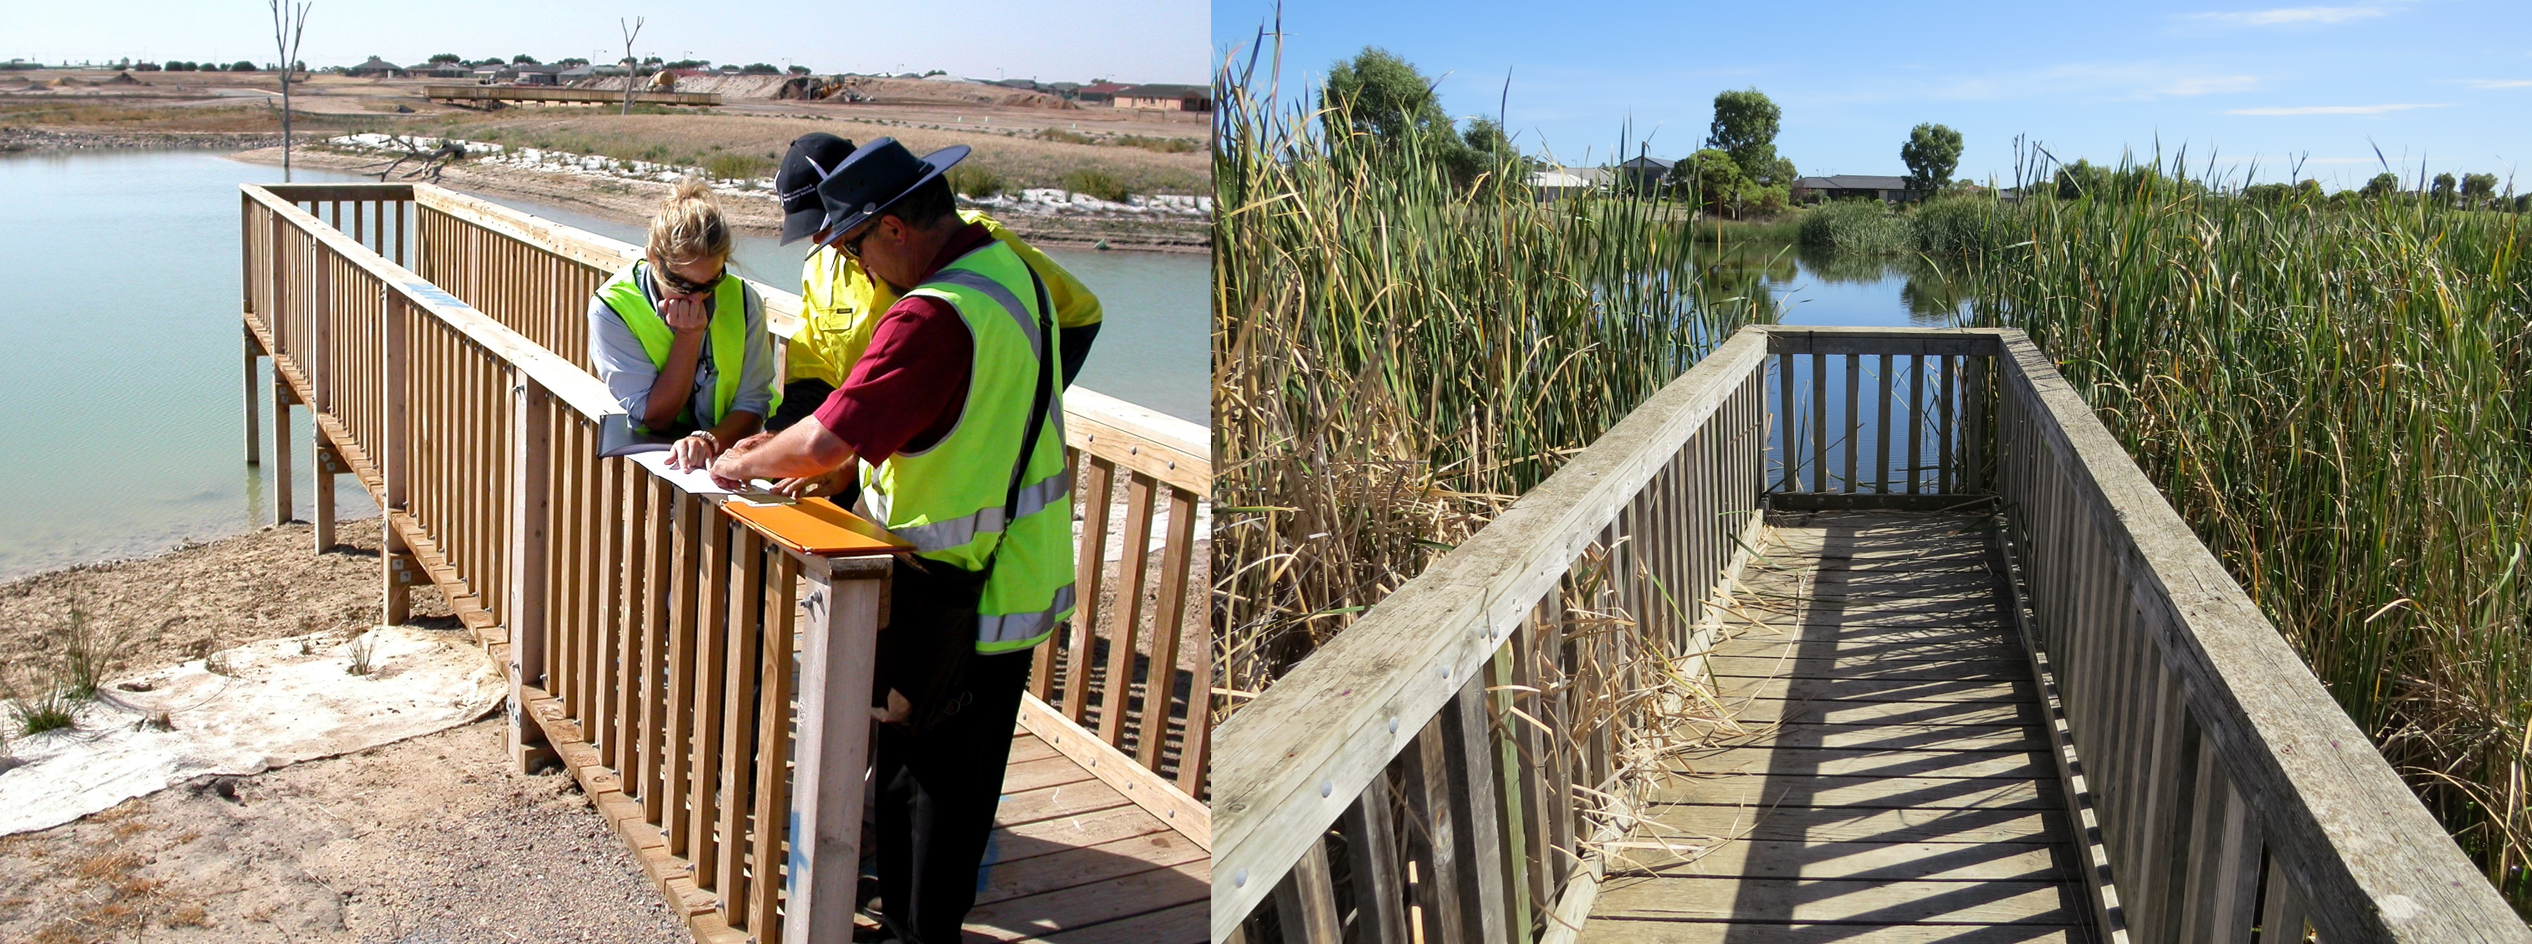 Comparison of bald wetlands following construction, 2008 with thick reed establishment, 2020